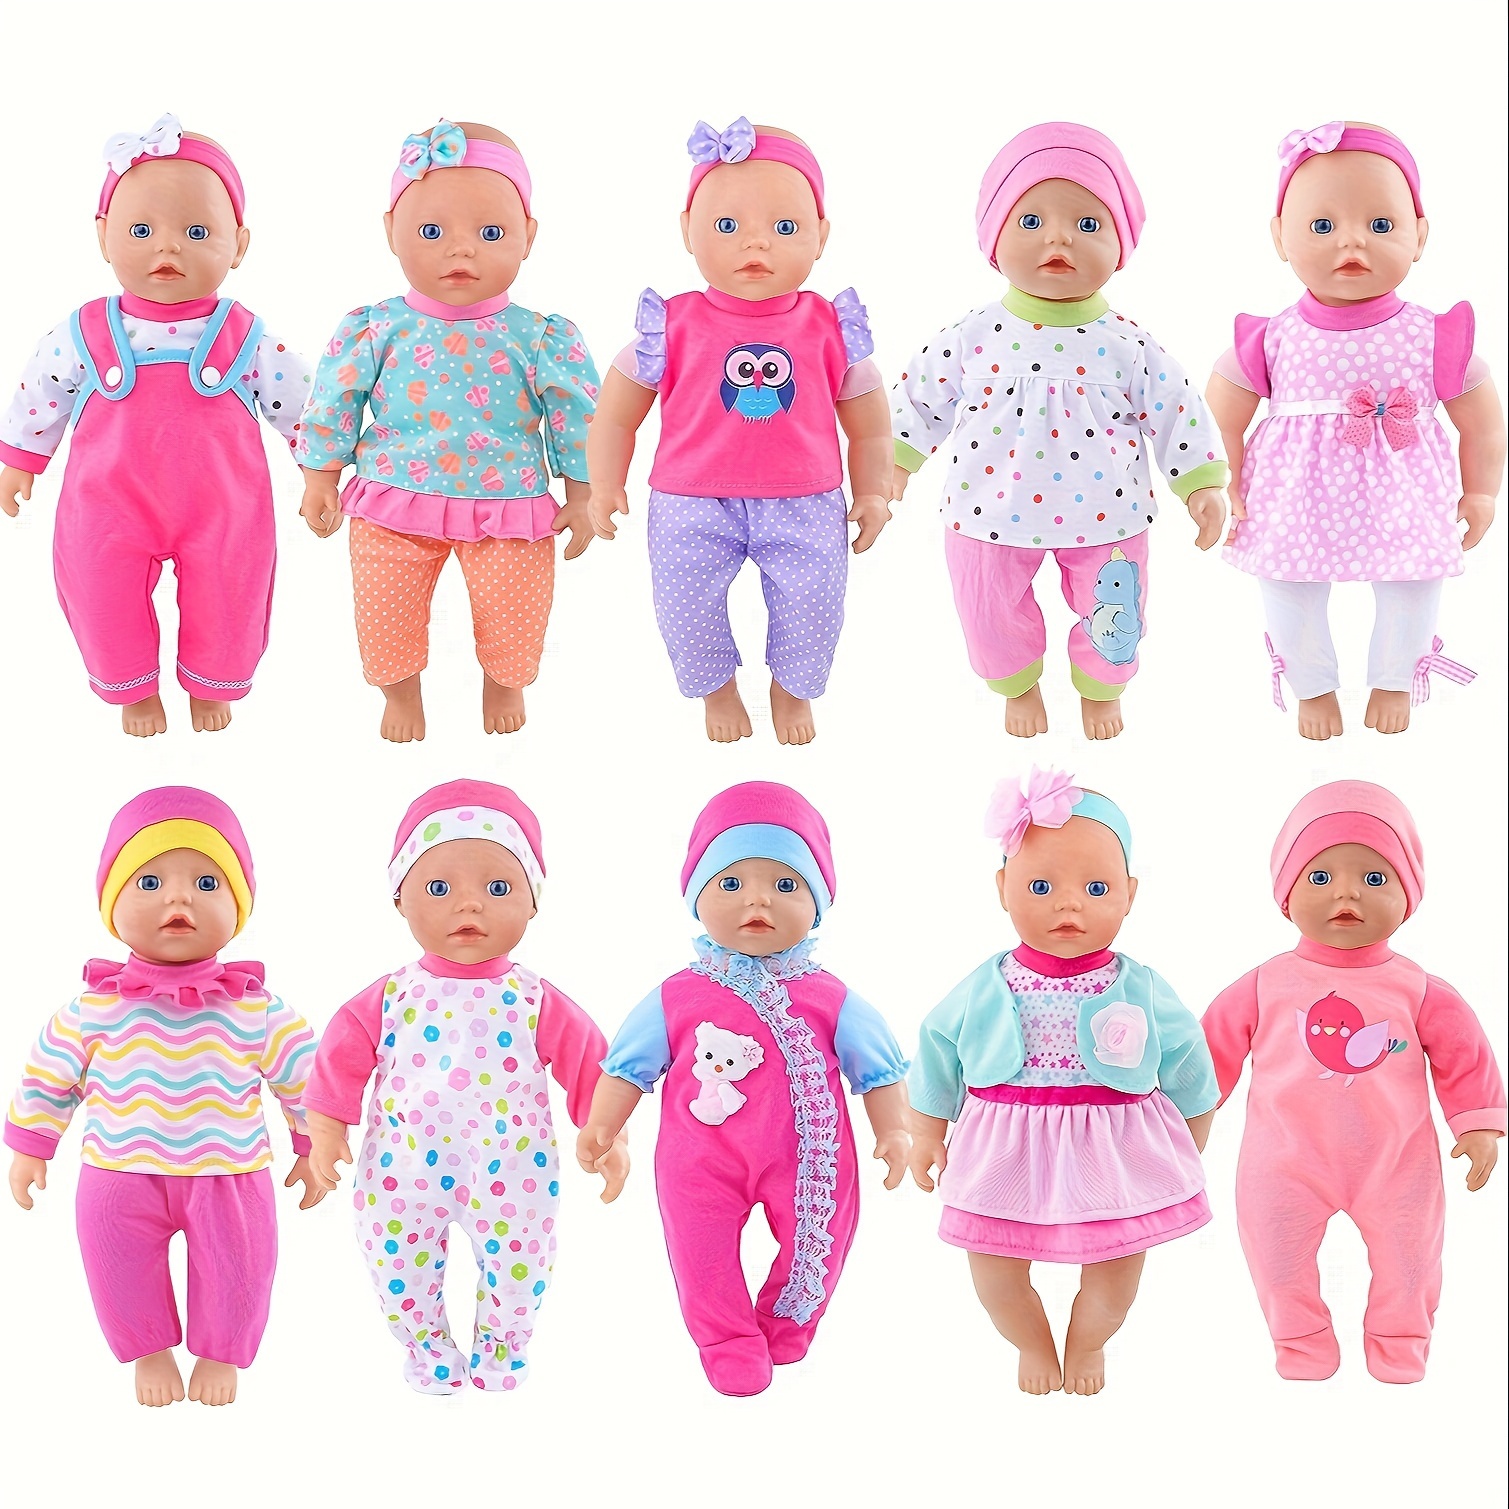 

10 Sets Baby Doll Playtime Outfits Clothes Hat Headband Fits For 10 Inch Baby Dolls 12 Inch New Born Baby/alive Baby Dolls 14 Inch Dolls (no Doll)